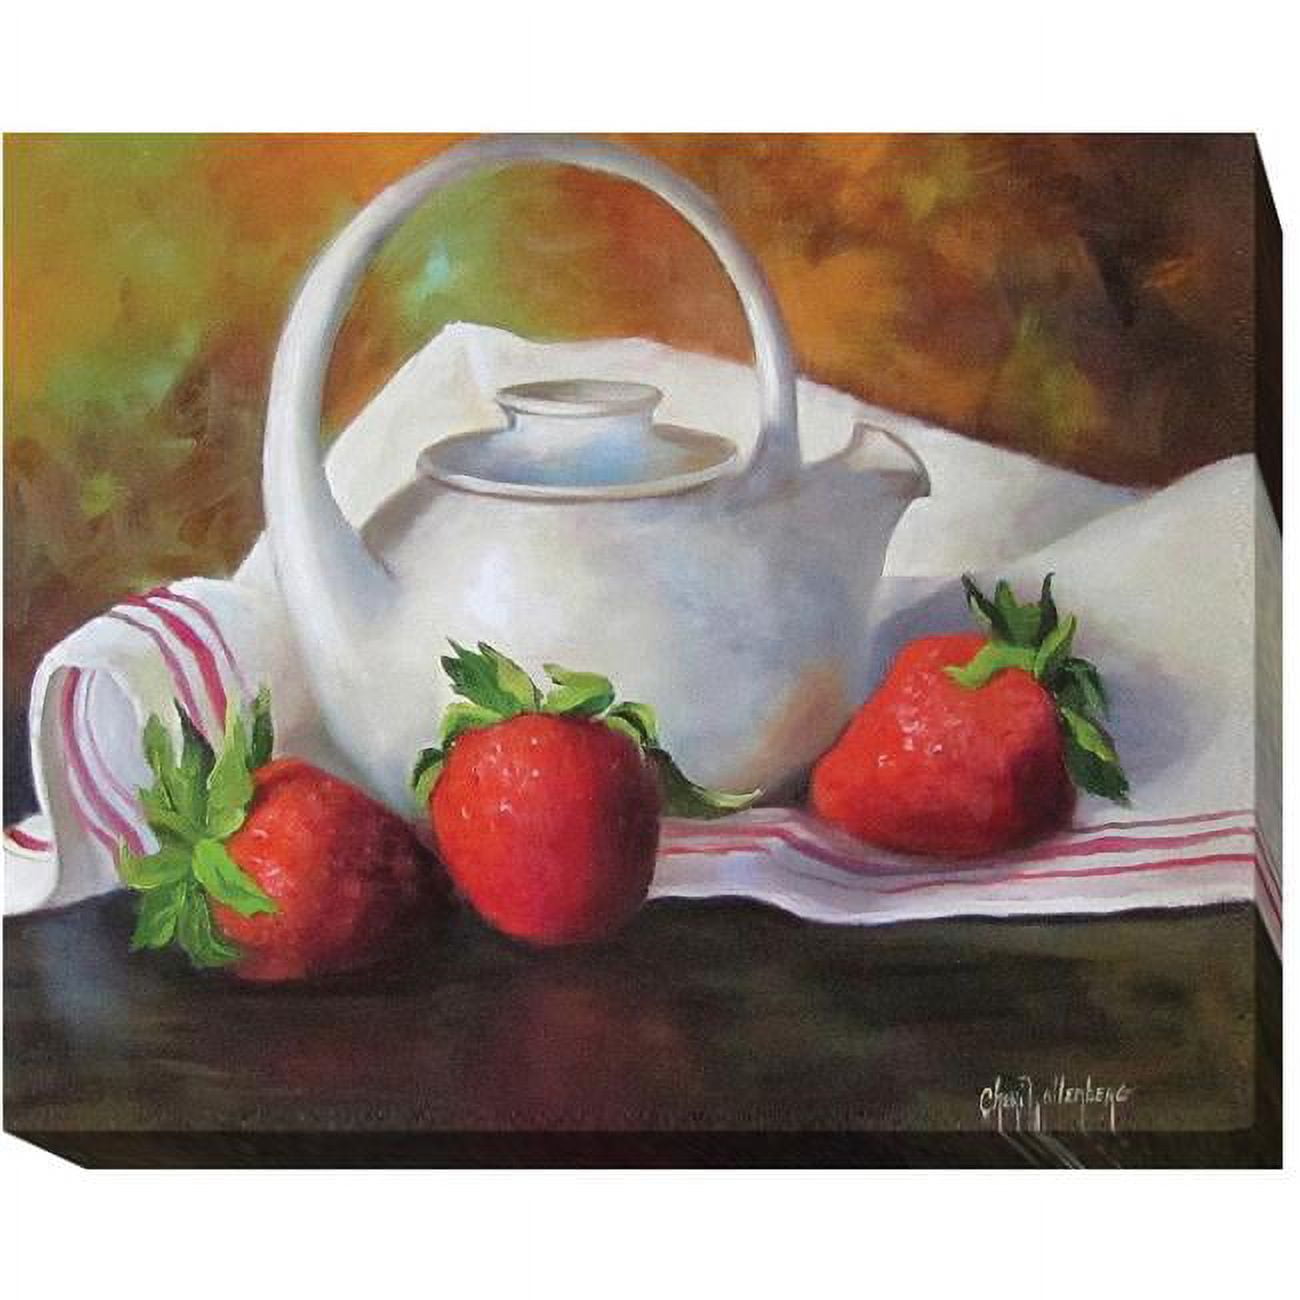 Strawberries & White Teapot By Cheri Wollenberg Premium Gallery-wrapped Canvas Giclee Art - Ready-to-hang, 16 X 20 X 1.5 In.